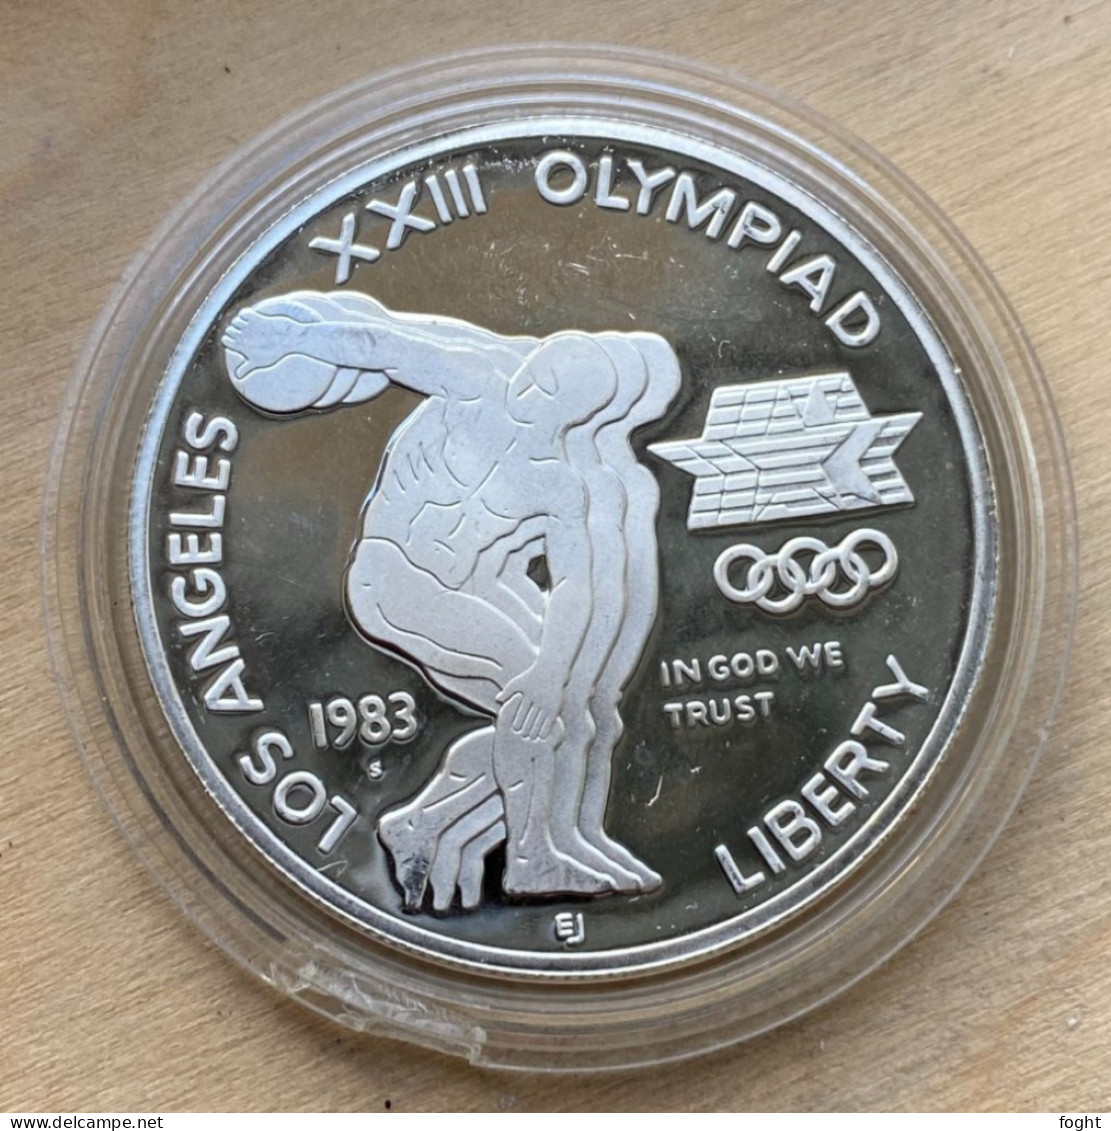 1983 S US .900 Silver Coin Los Angeles Olympics,PROOF,KM#209,6488 - Herdenking